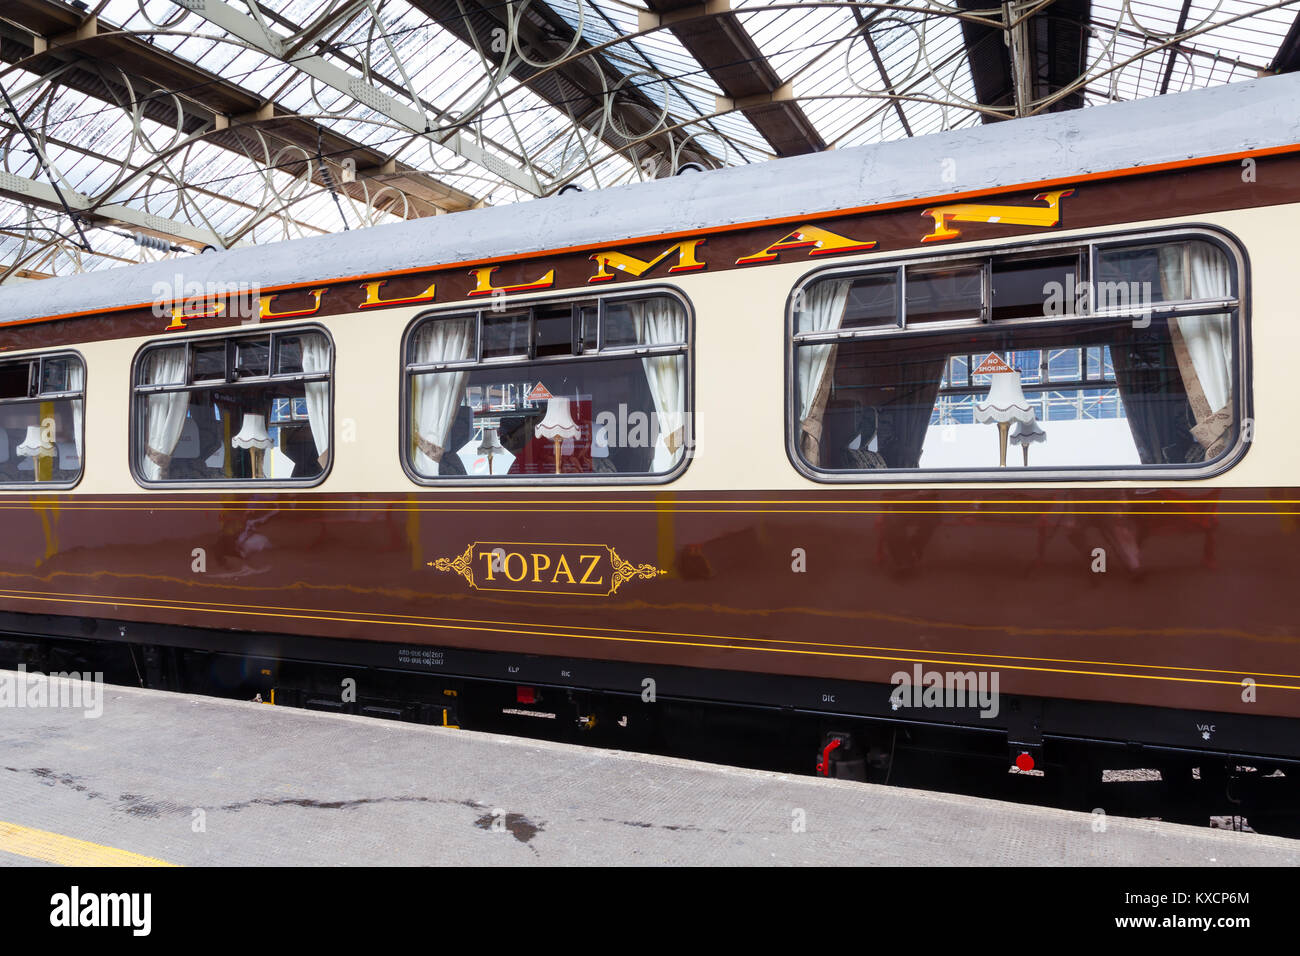 A preserved Pullman carriage is pictured in Carlisle Citadel station in Cumbria.  Pullman was a luxury railway service that operated in Great Britain. Stock Photo